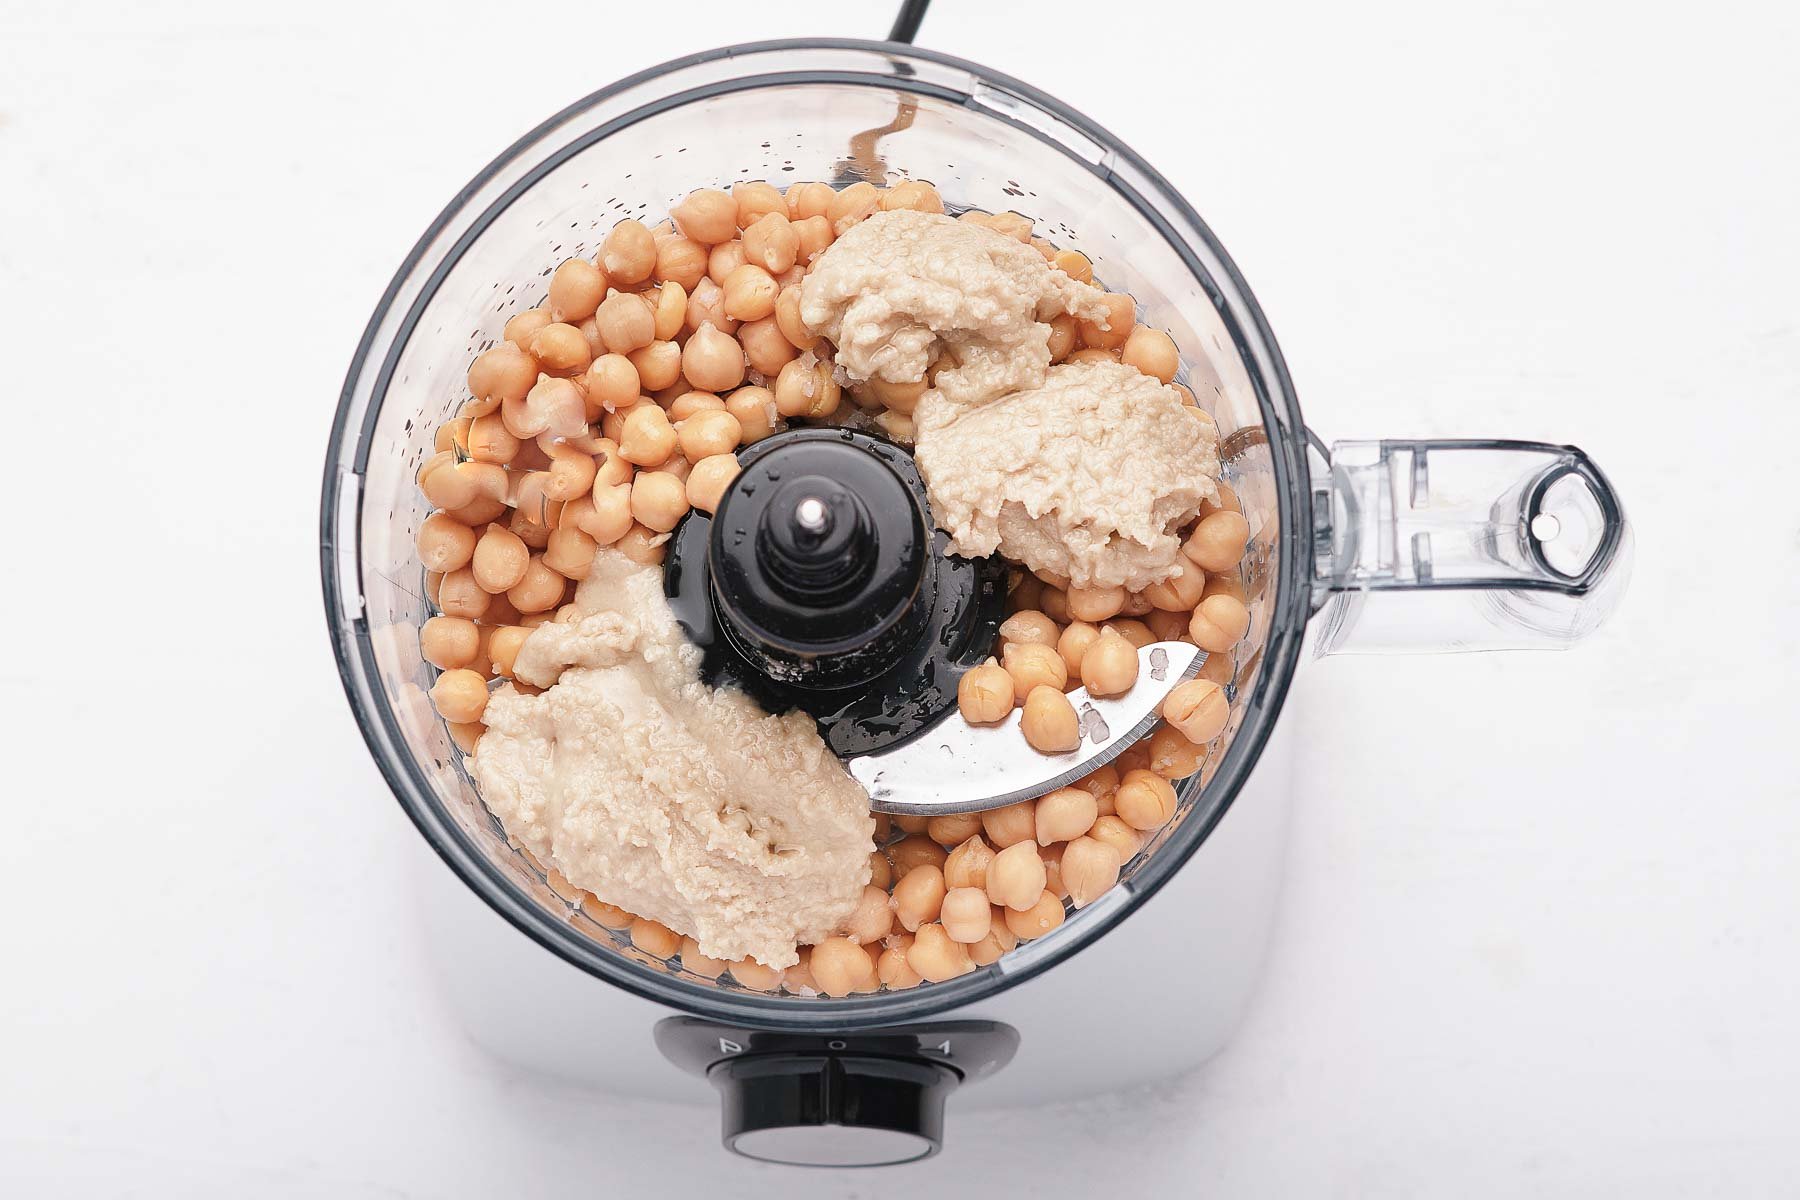 Chickpeas and tahini in a food processor bowl.